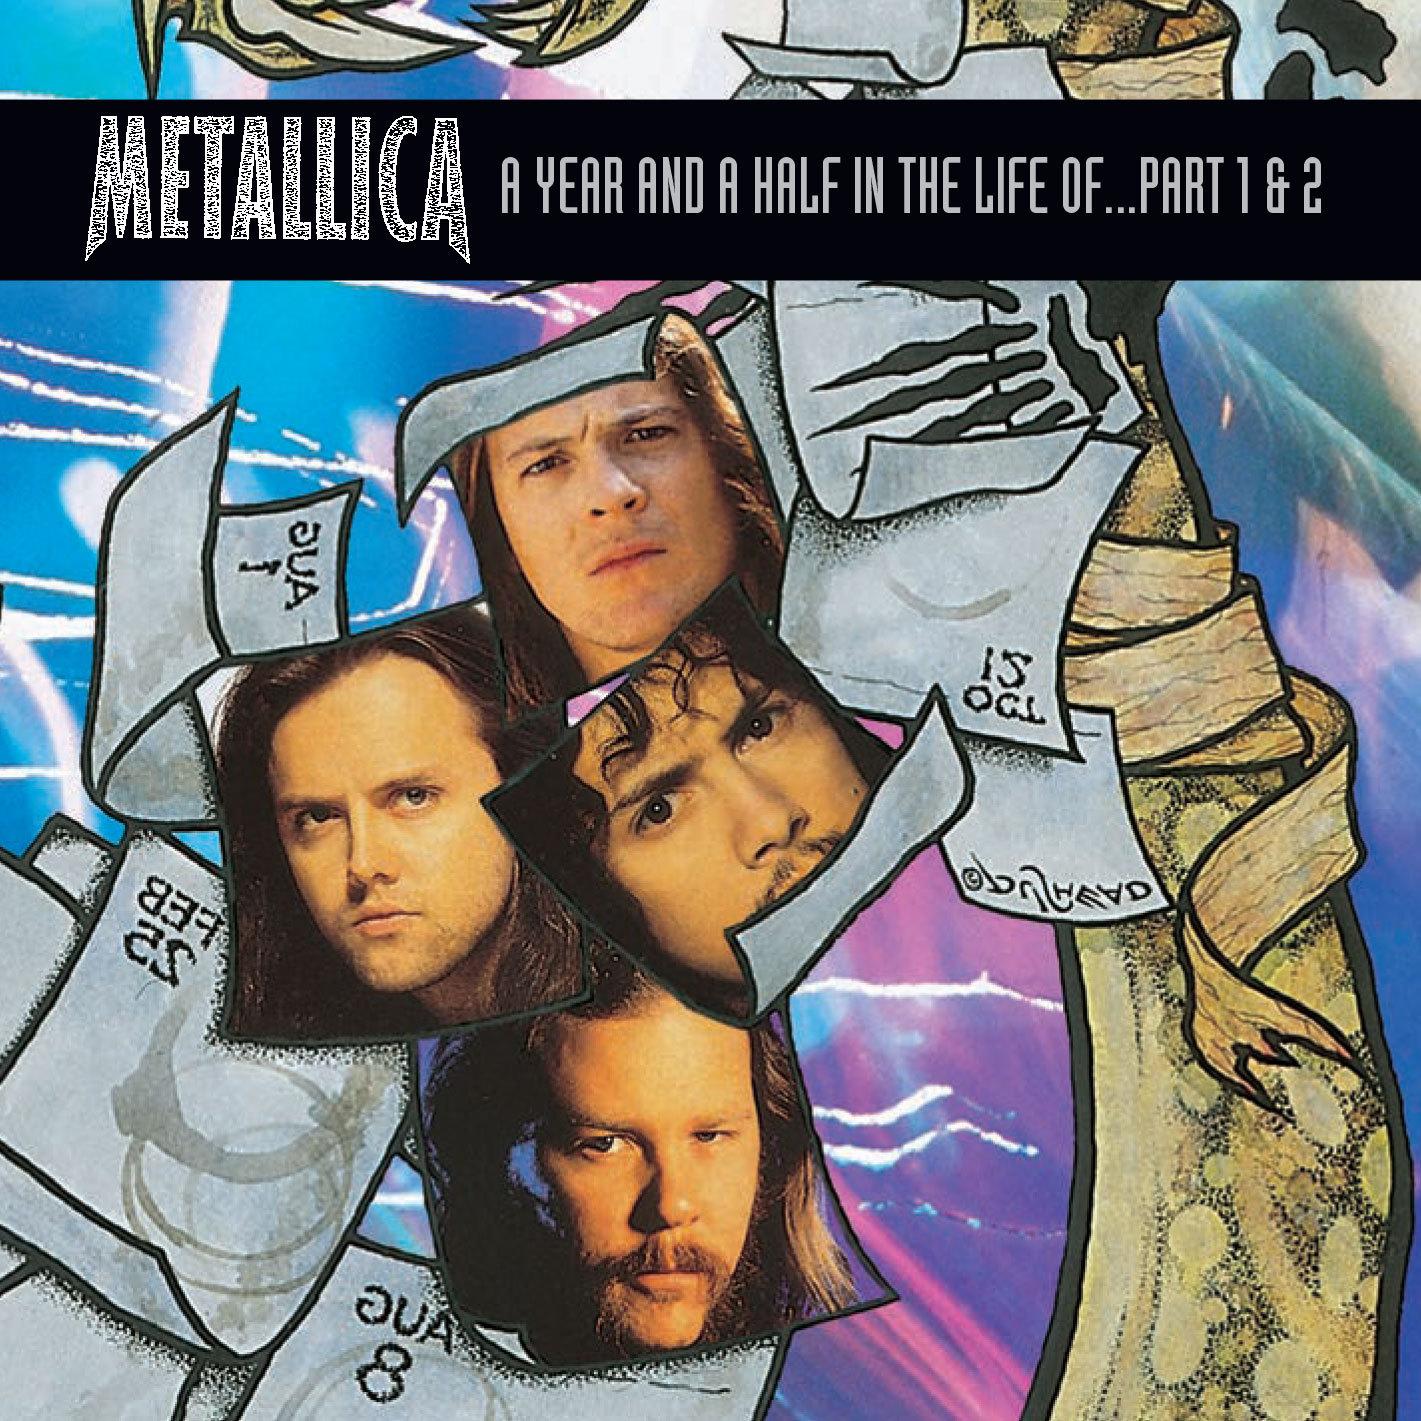 &quot;A Year and a Half in the Life of Metallica&quot; Album Cover